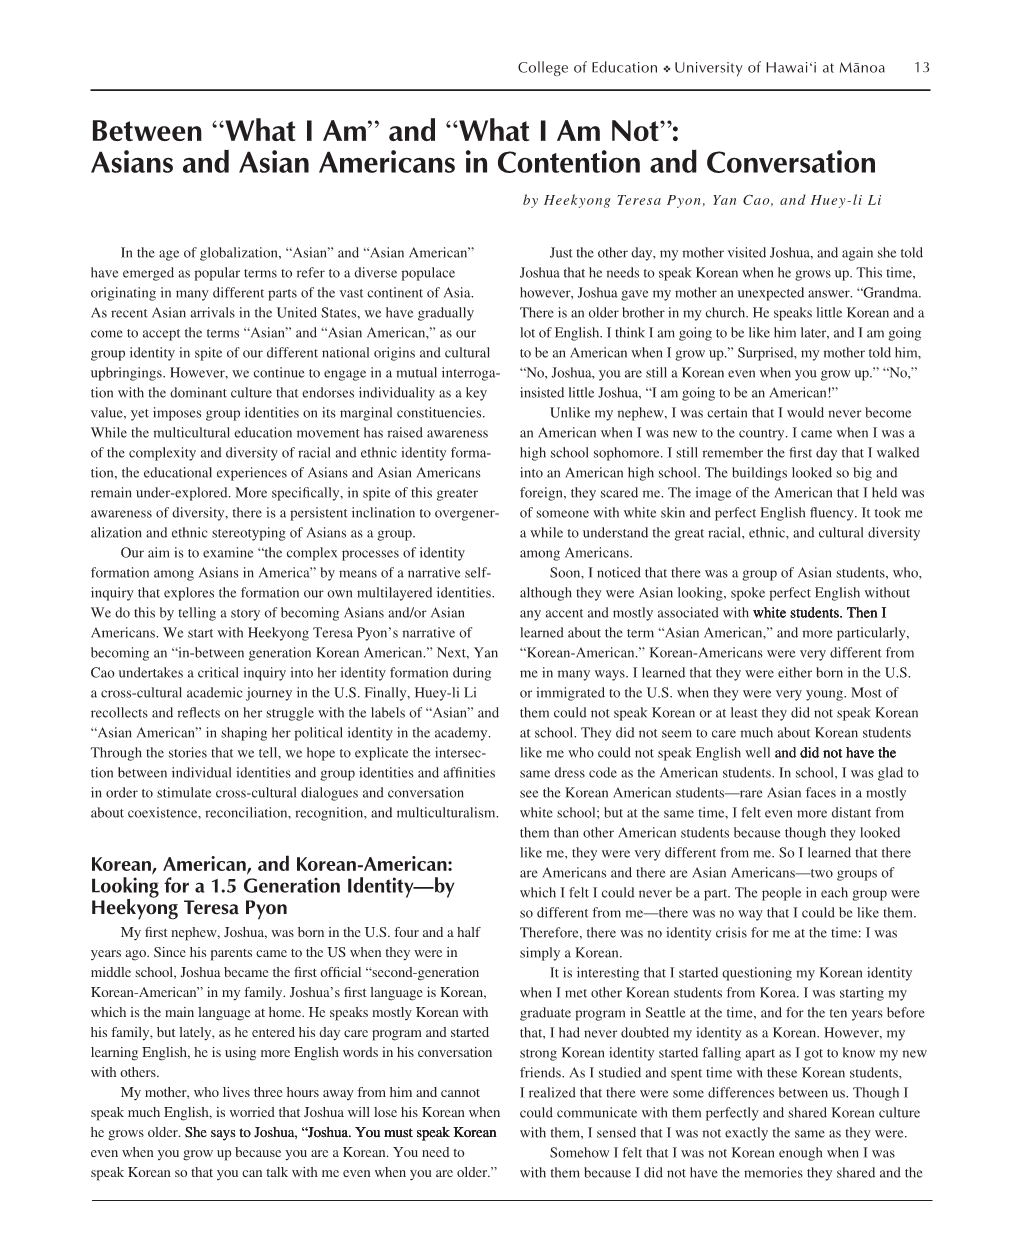 And “What I Am Not”: Asians and Asian Americans in Contention and Conversation by Heekyong Teresa Pyon, Yan Cao, and Huey-Li Li